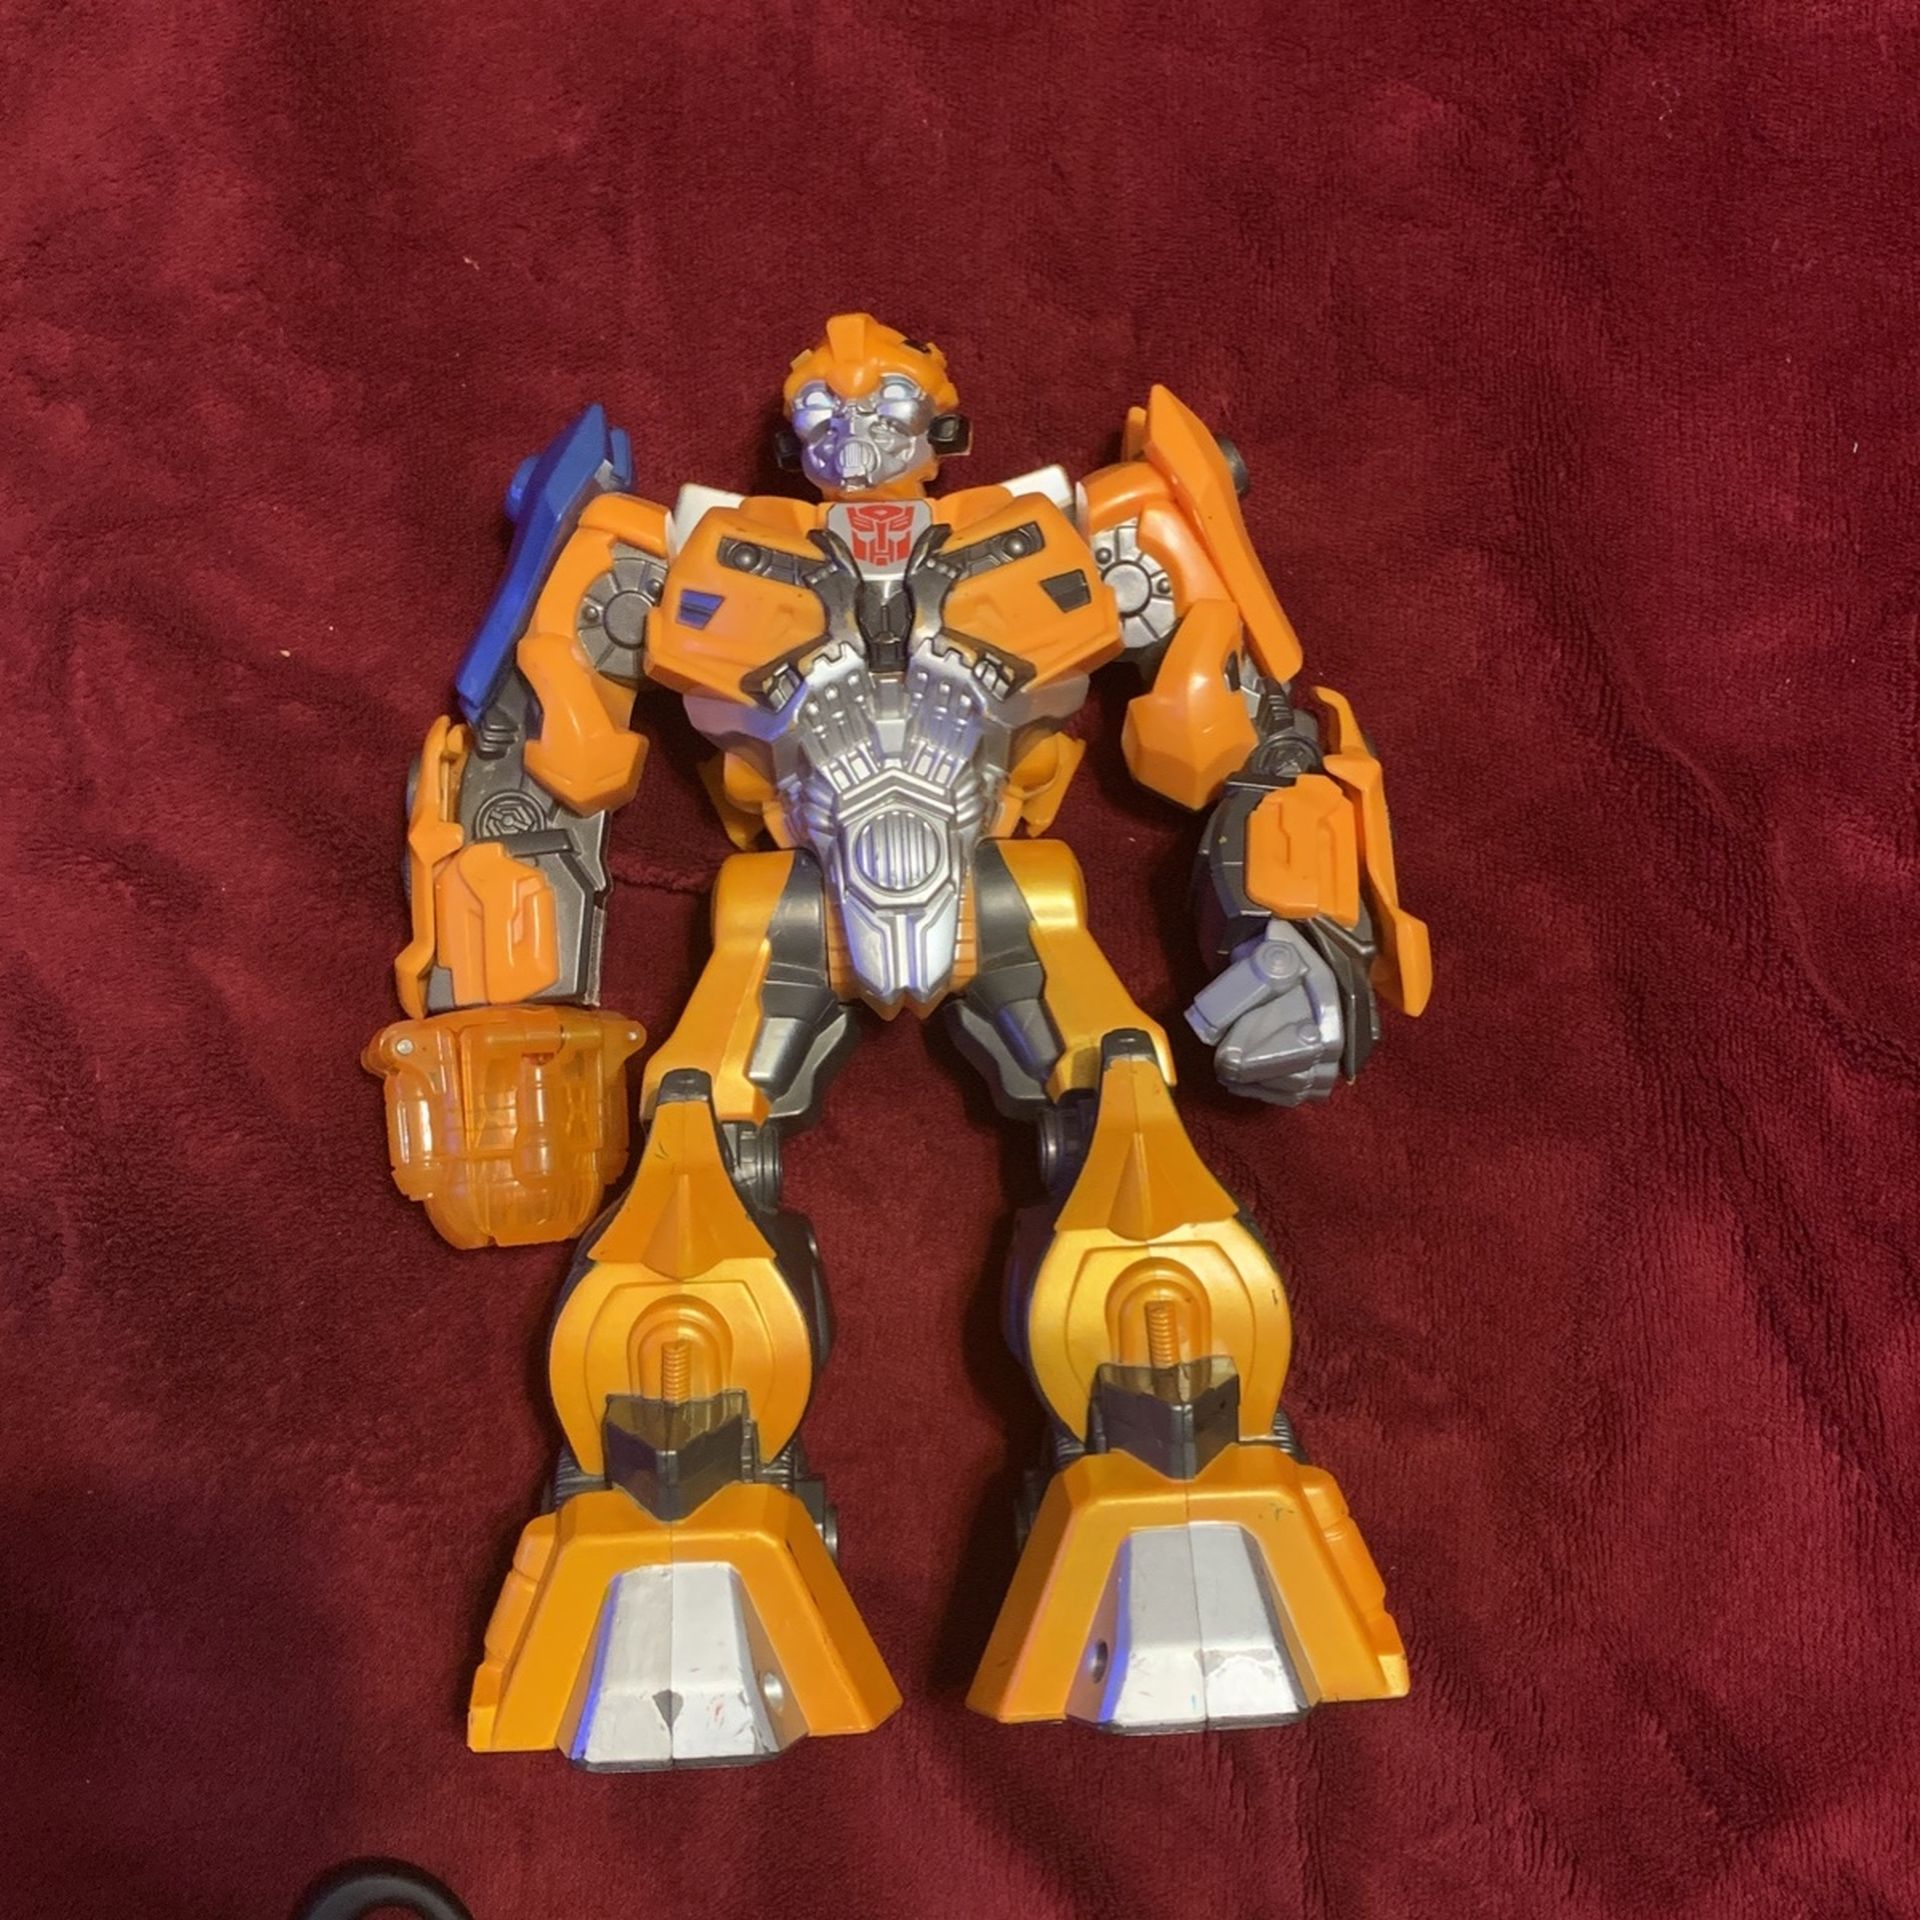 Hasbro-Tomy Transformers Bumblebee-Talking Action 10" Tall Sound & Light Up